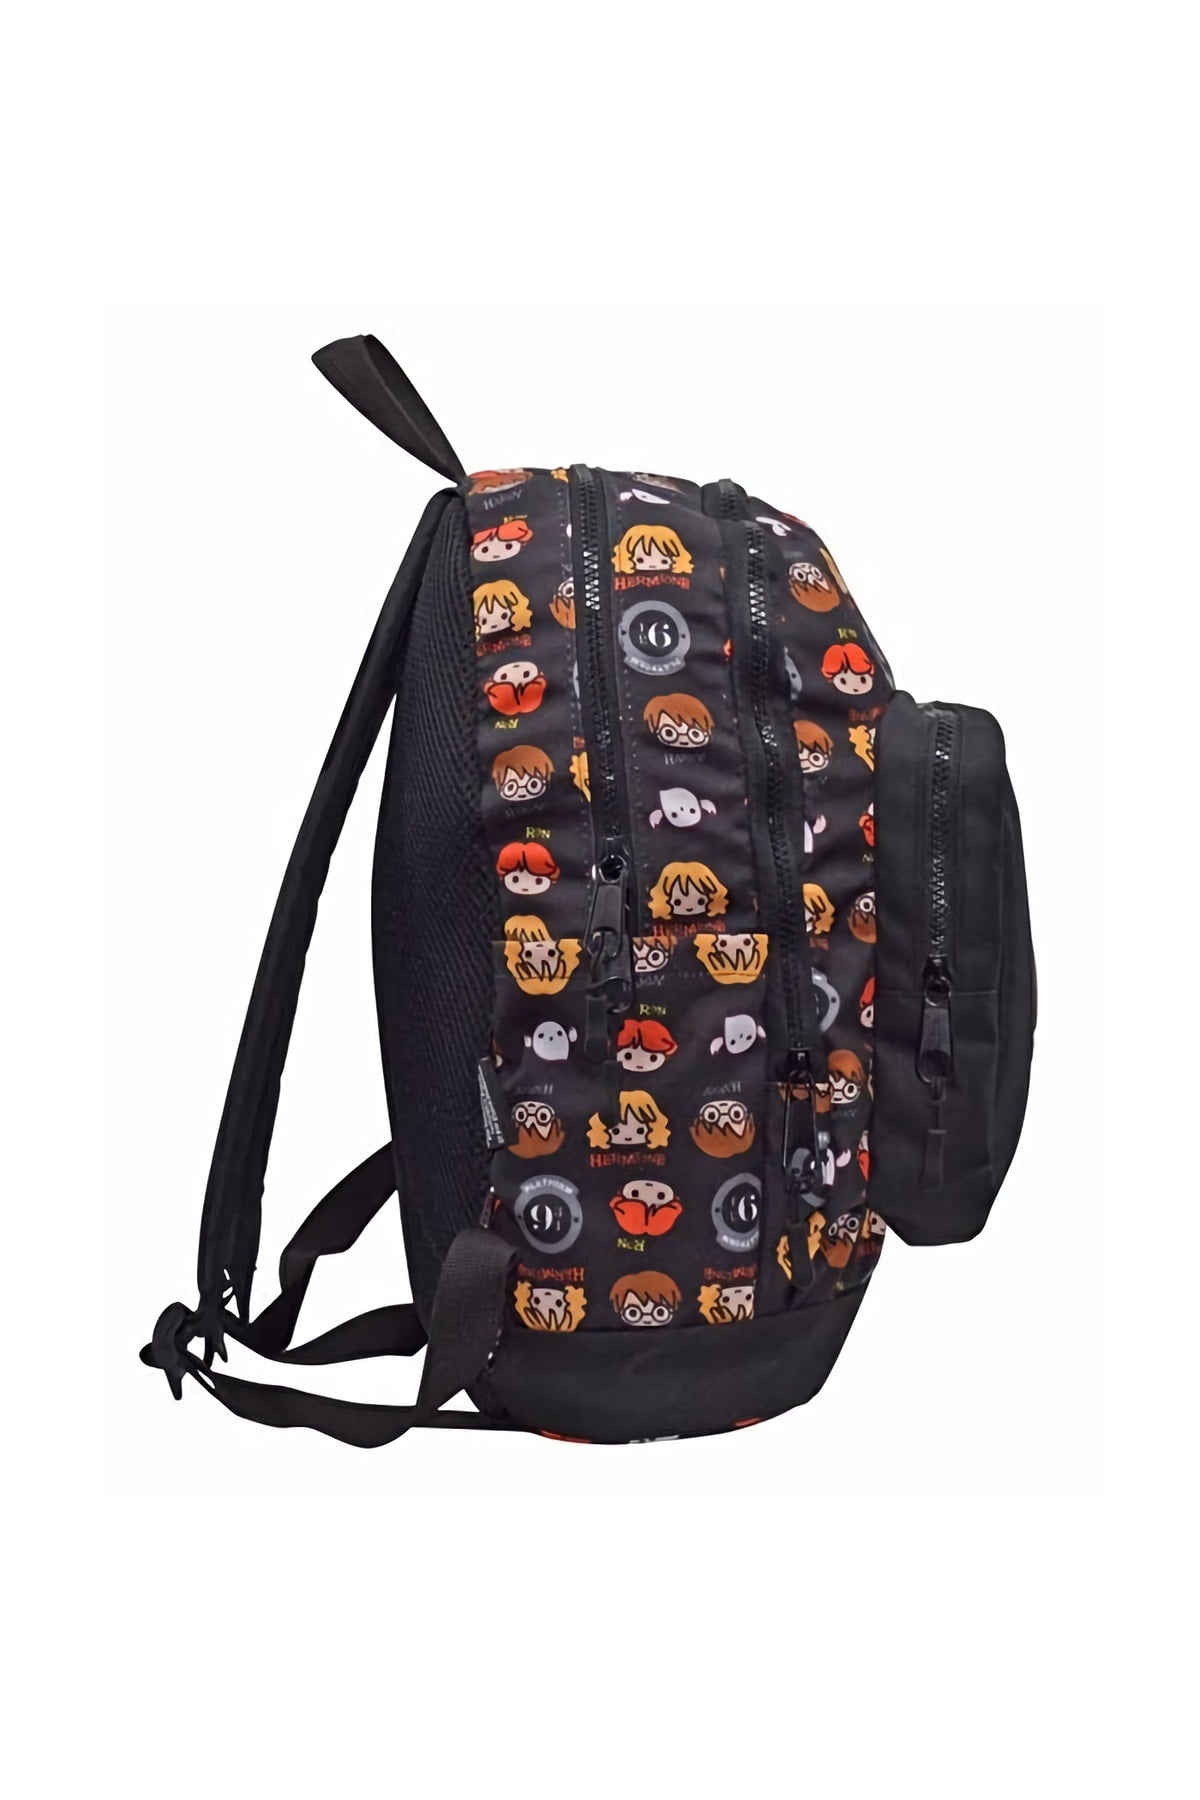 Harry Potter Primary And Secondary School Bag-1356